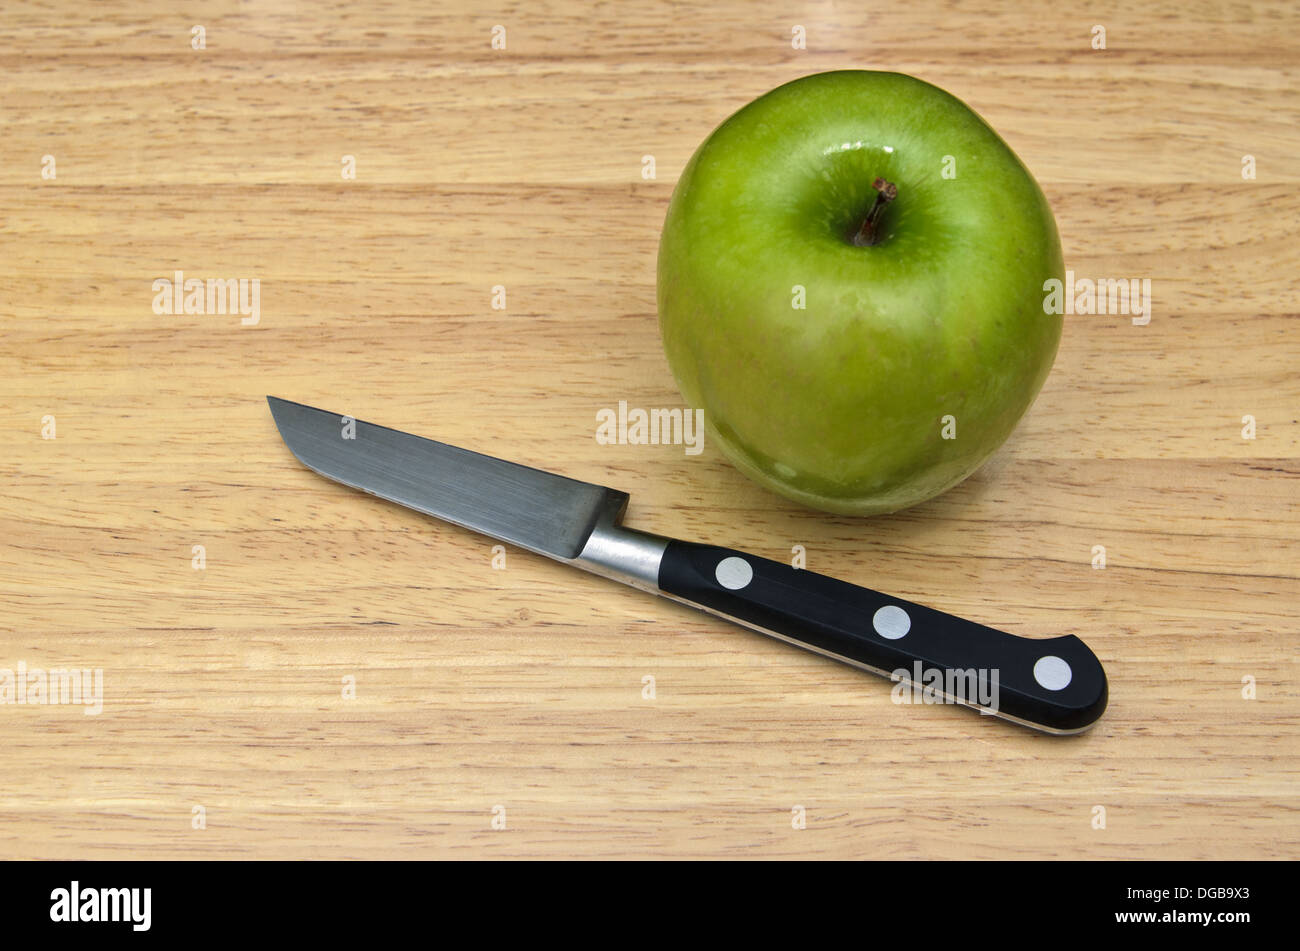 Green Apple with A Knife on Wood Table Stock Photo